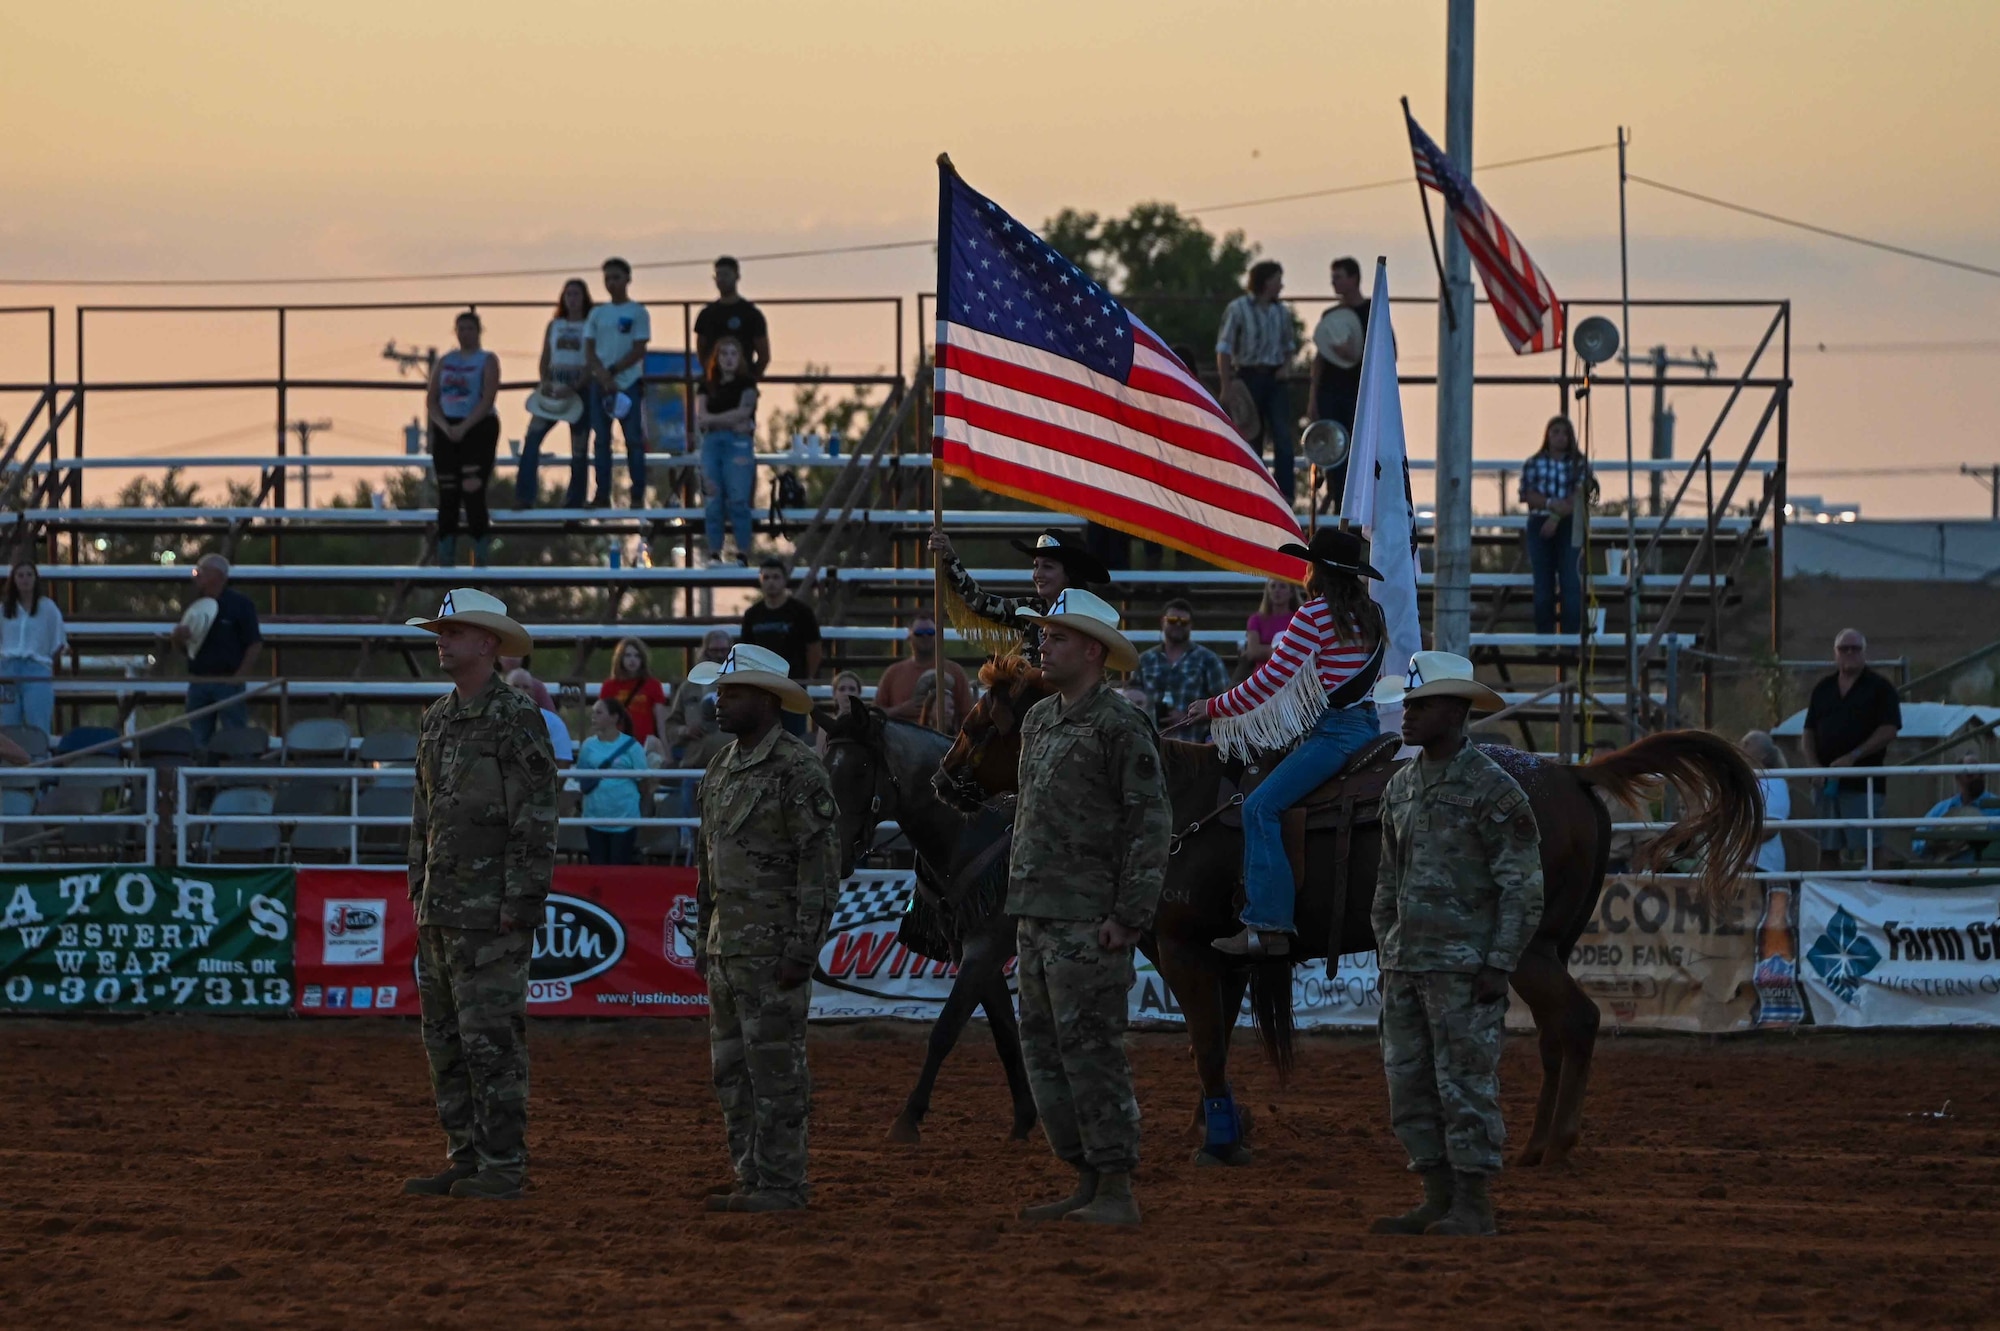 Airmen from the 97th Air Mobility Wing stand at attention during the playing of the national anthem at the Great Plains Stampede Rodeo in Altus, Oklahoma, August 24, 2023. During Military Appreciation Night, the rodeo honored the wing command team and Senior Airman Aaron Darling, 97th Security Forces installation entry controller, who represented all the Airmen of Altus Air Force Base. (U.S. Air Force photo by Airman 1st Class Kari Degraffenreed)